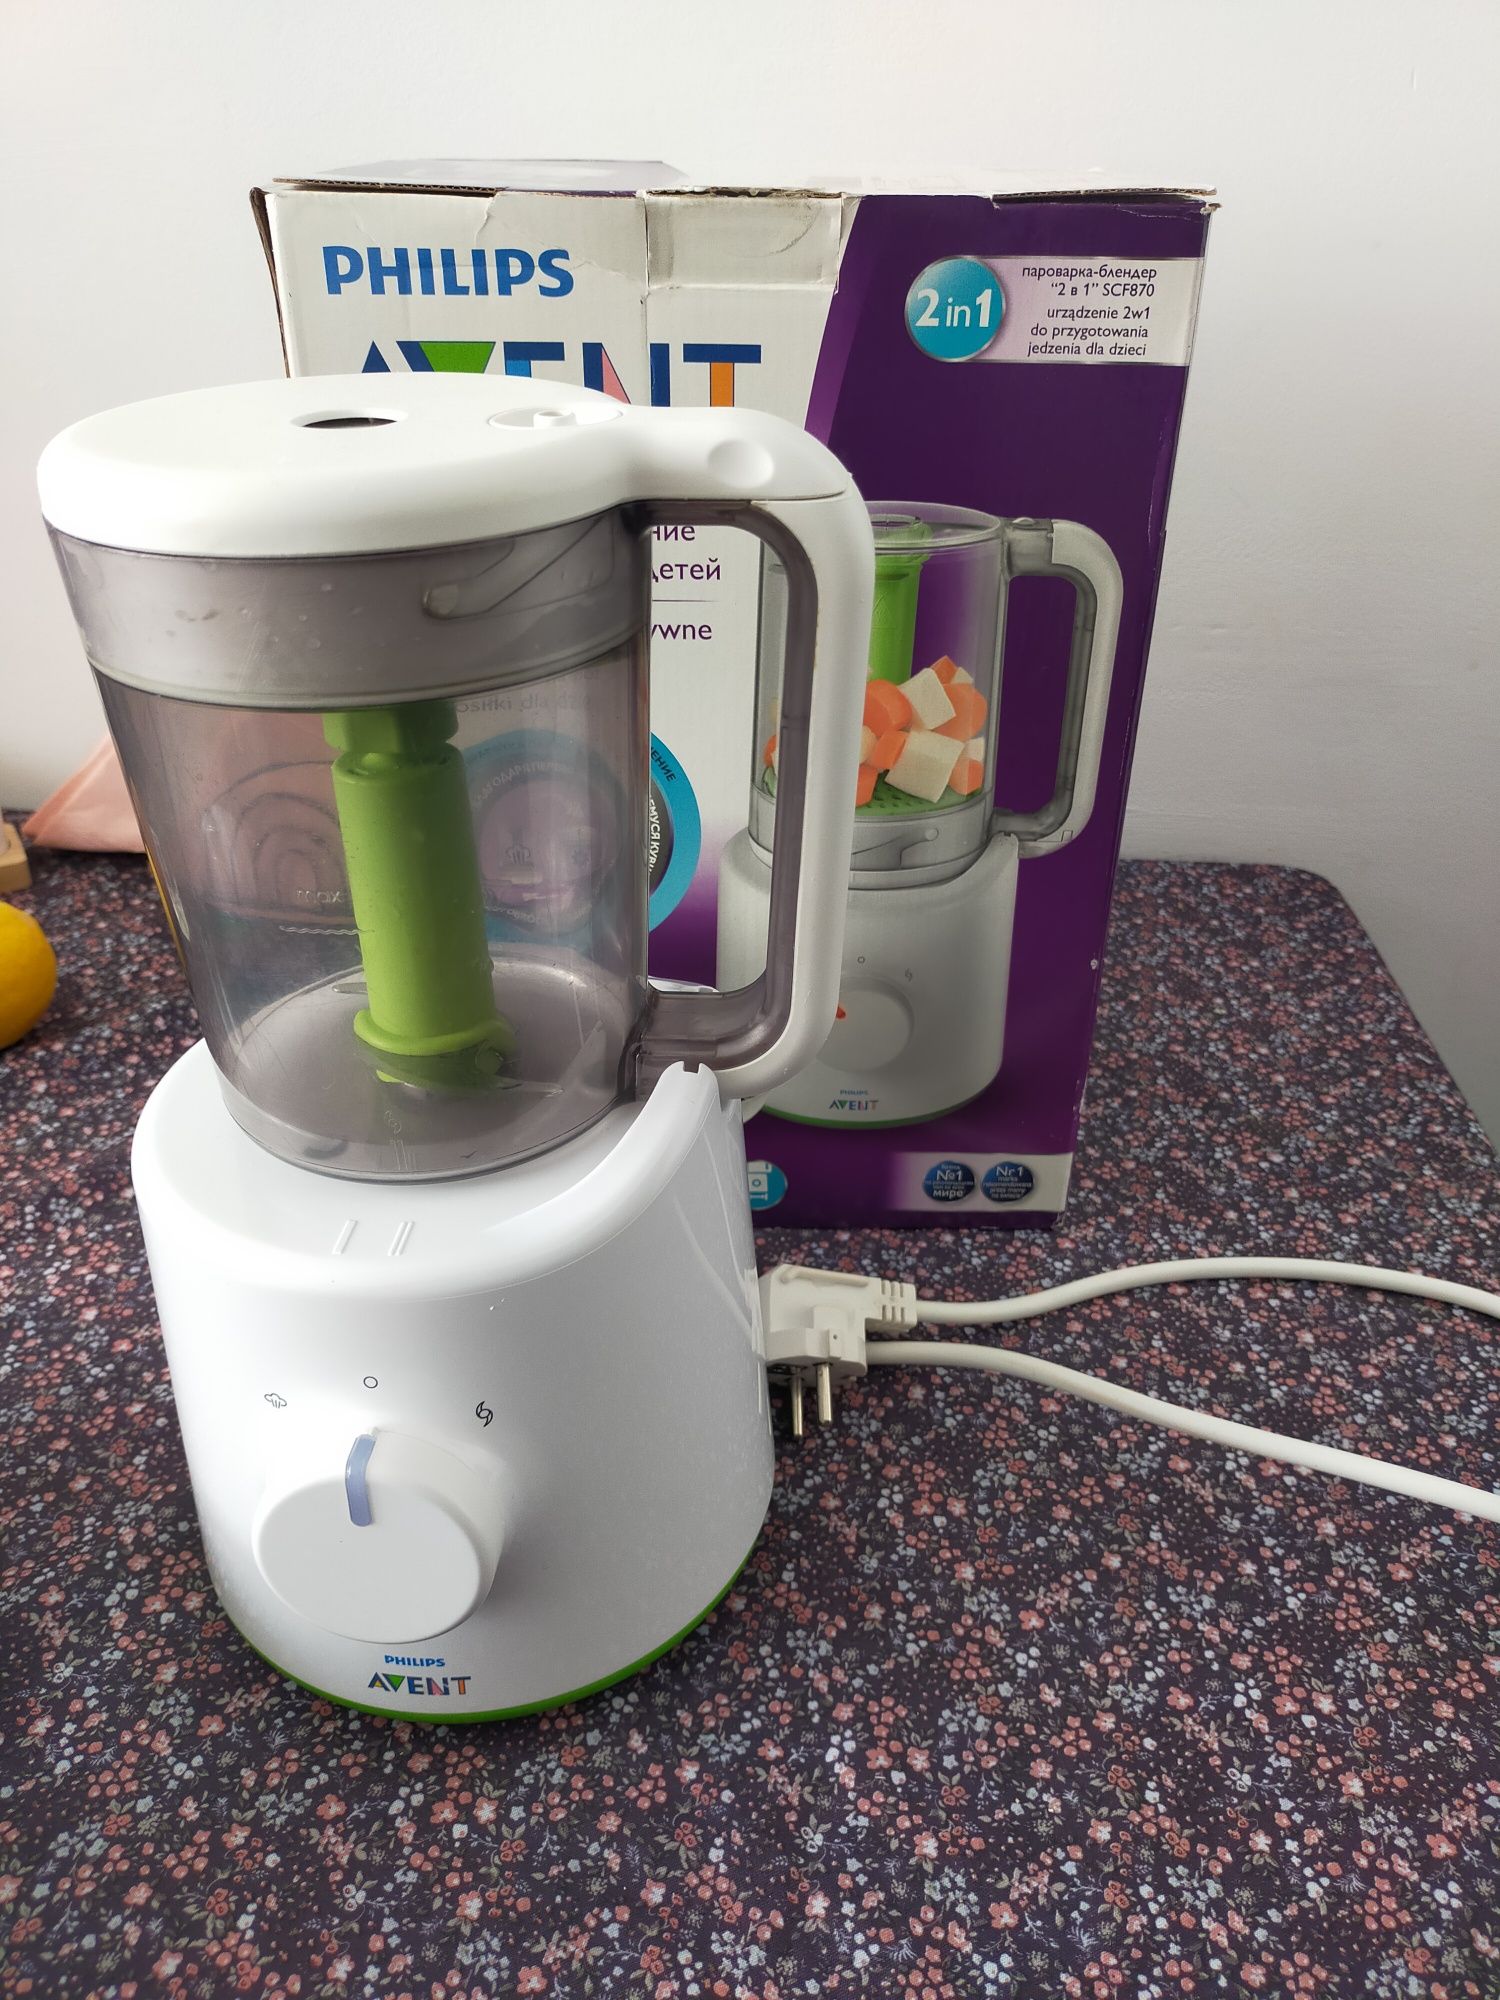 Philips Avent 2 in 1